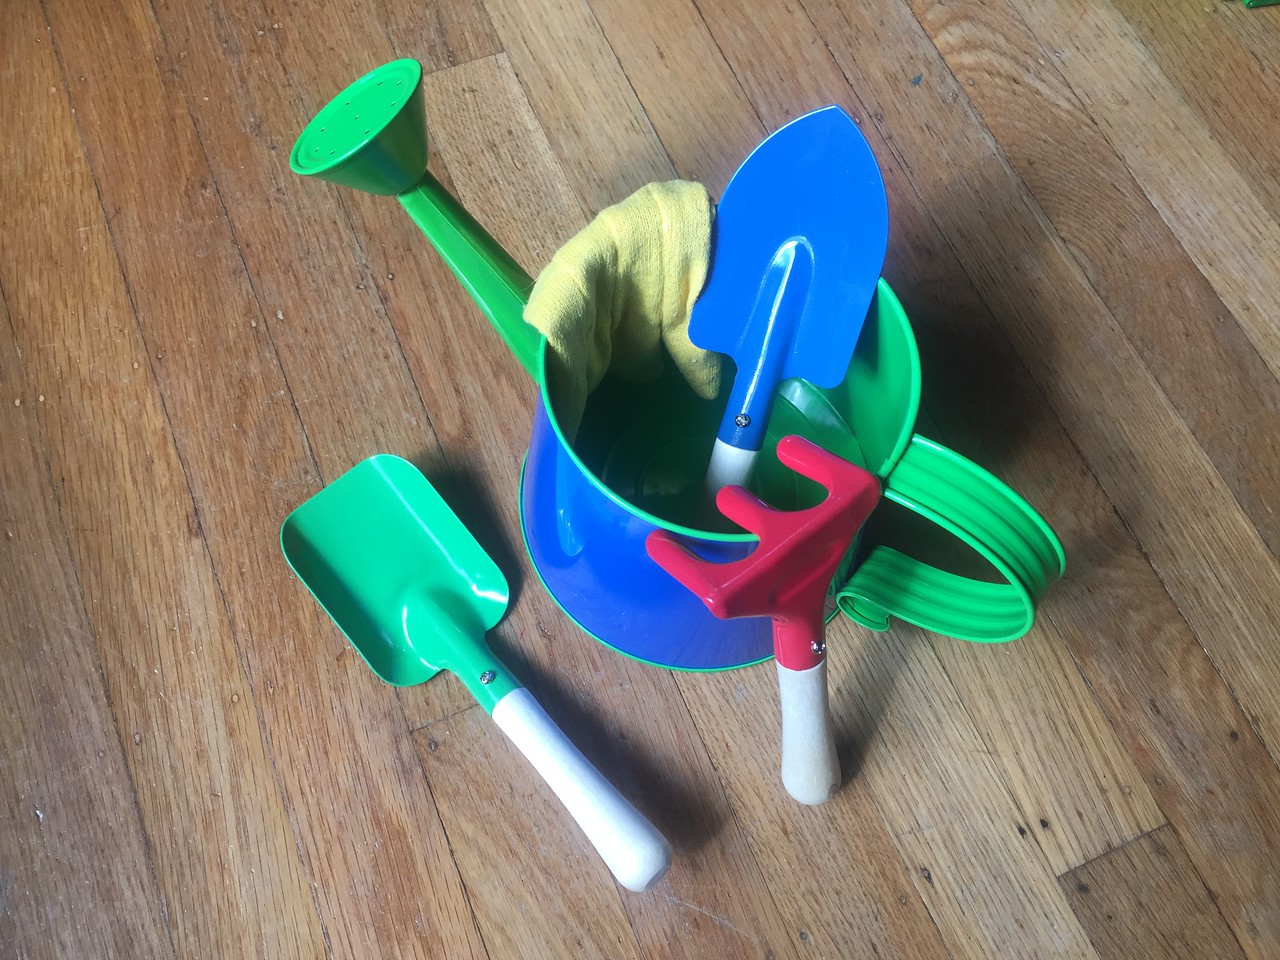 Toysmith kids small gardening tools set with blue watering can, green shovel, blue trowel, red rake, and yellow gloves